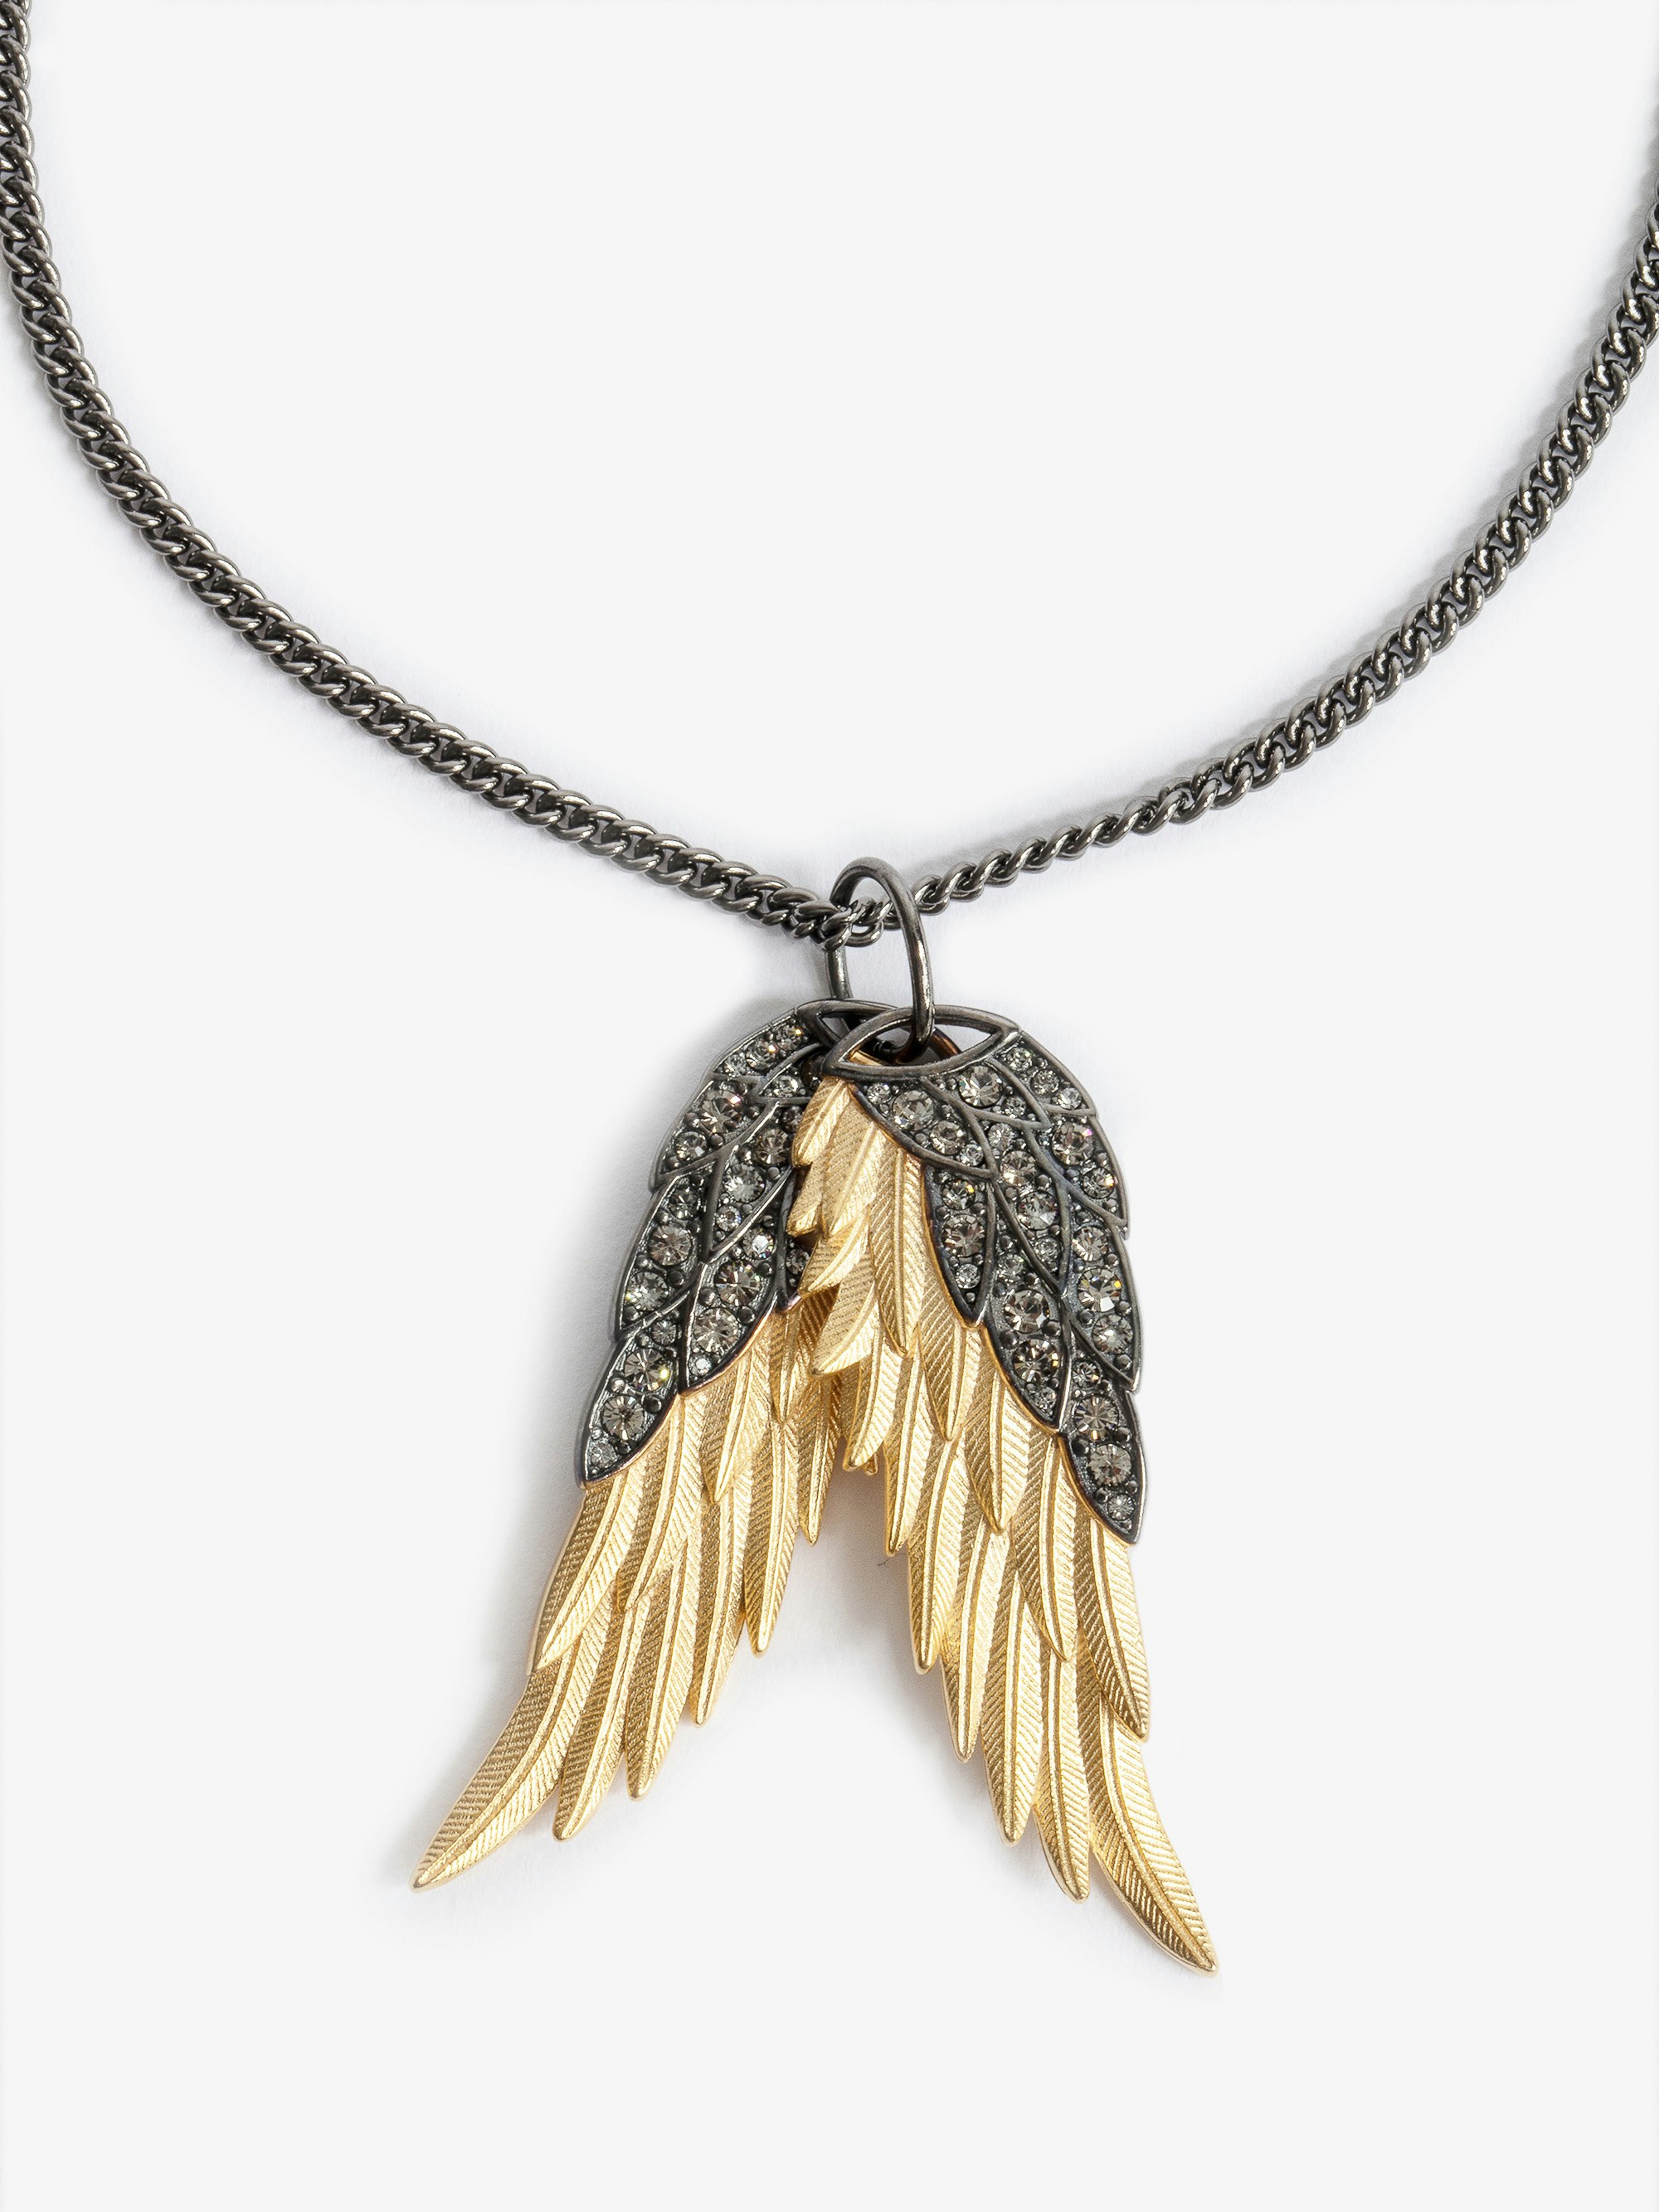 Rock Feather Pendant Necklace - Women's brass and rhinestone necklace.